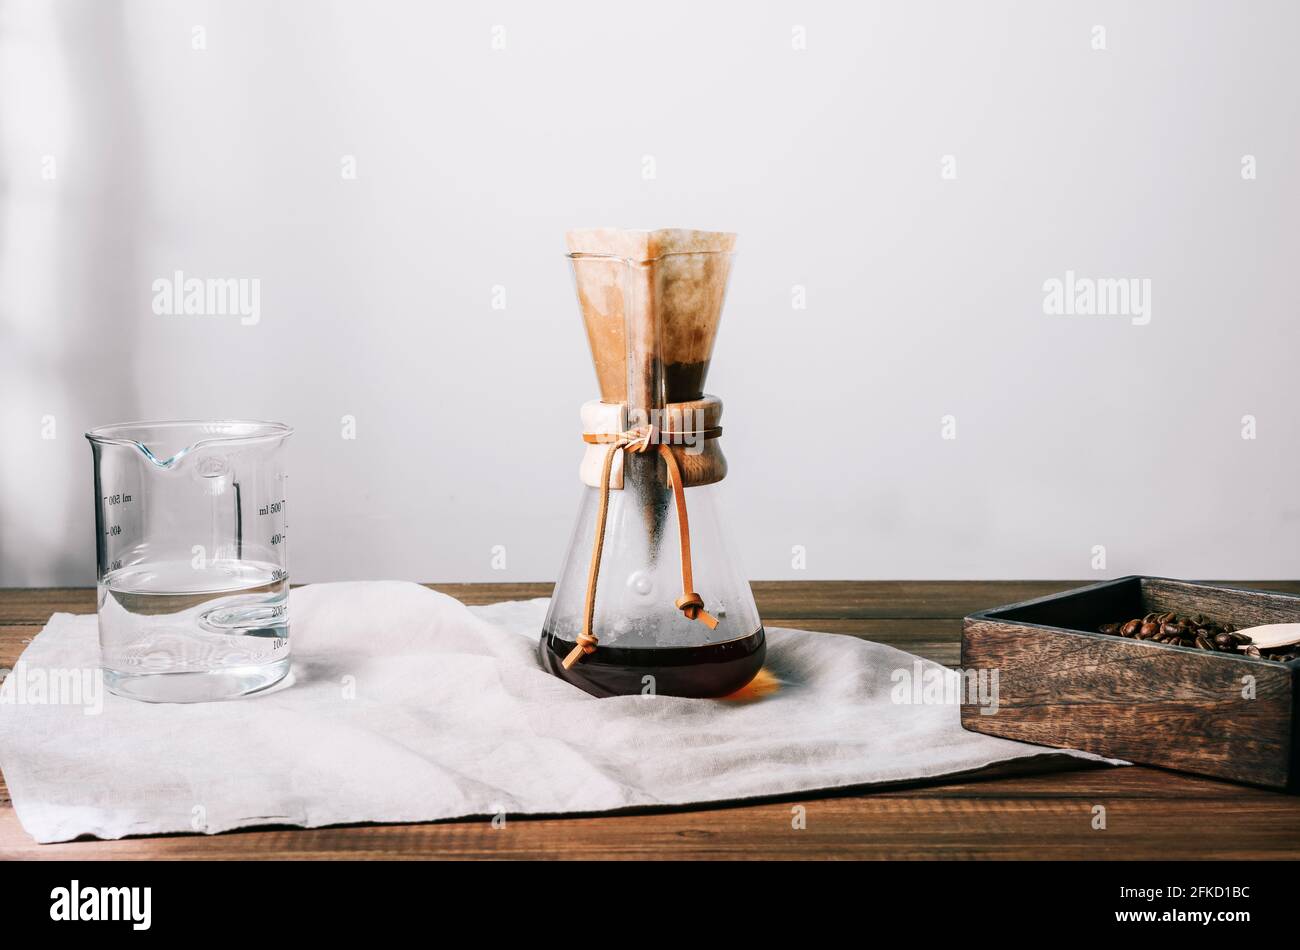 Manual glass coffee pot with filter and coffee on a gray cloth on a wooden table with coffee bean container and glass measuring jug on the sides Stock Photo